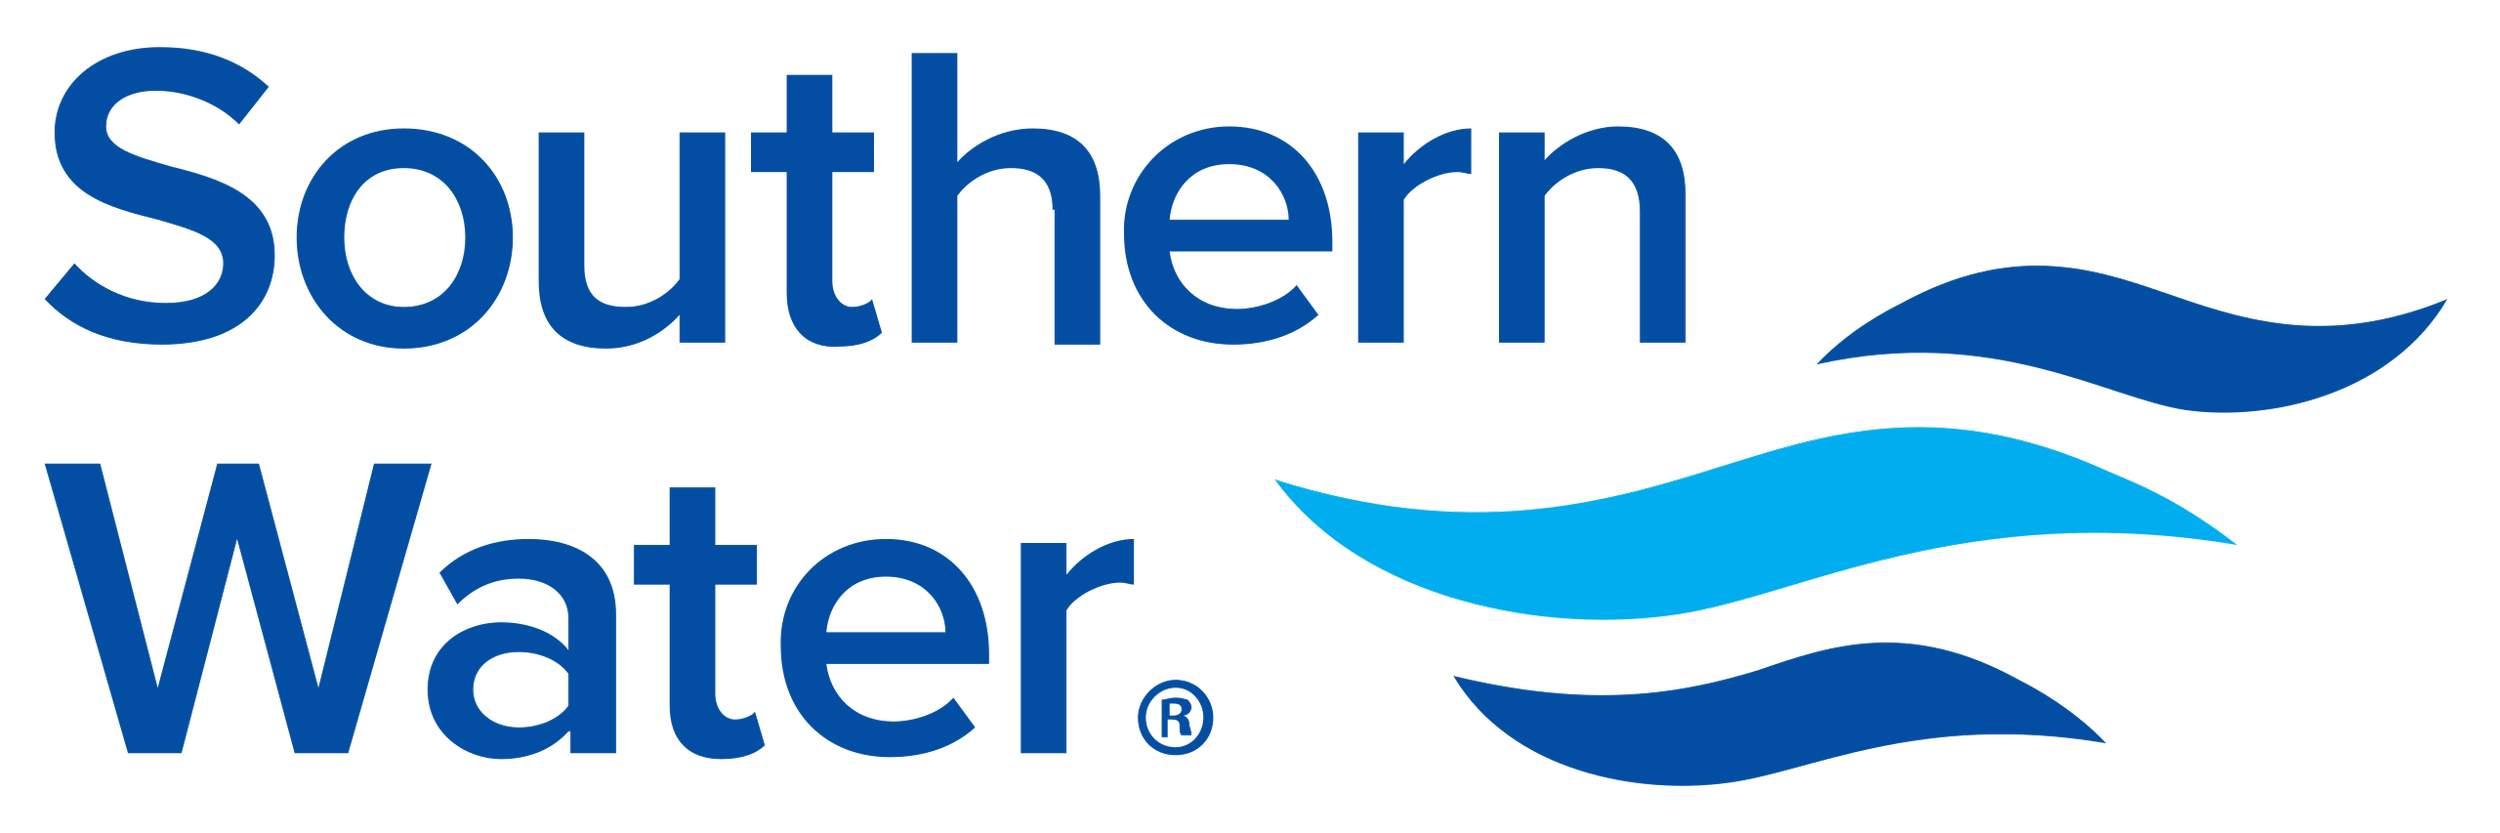 Southern_Water_logo.svg.png